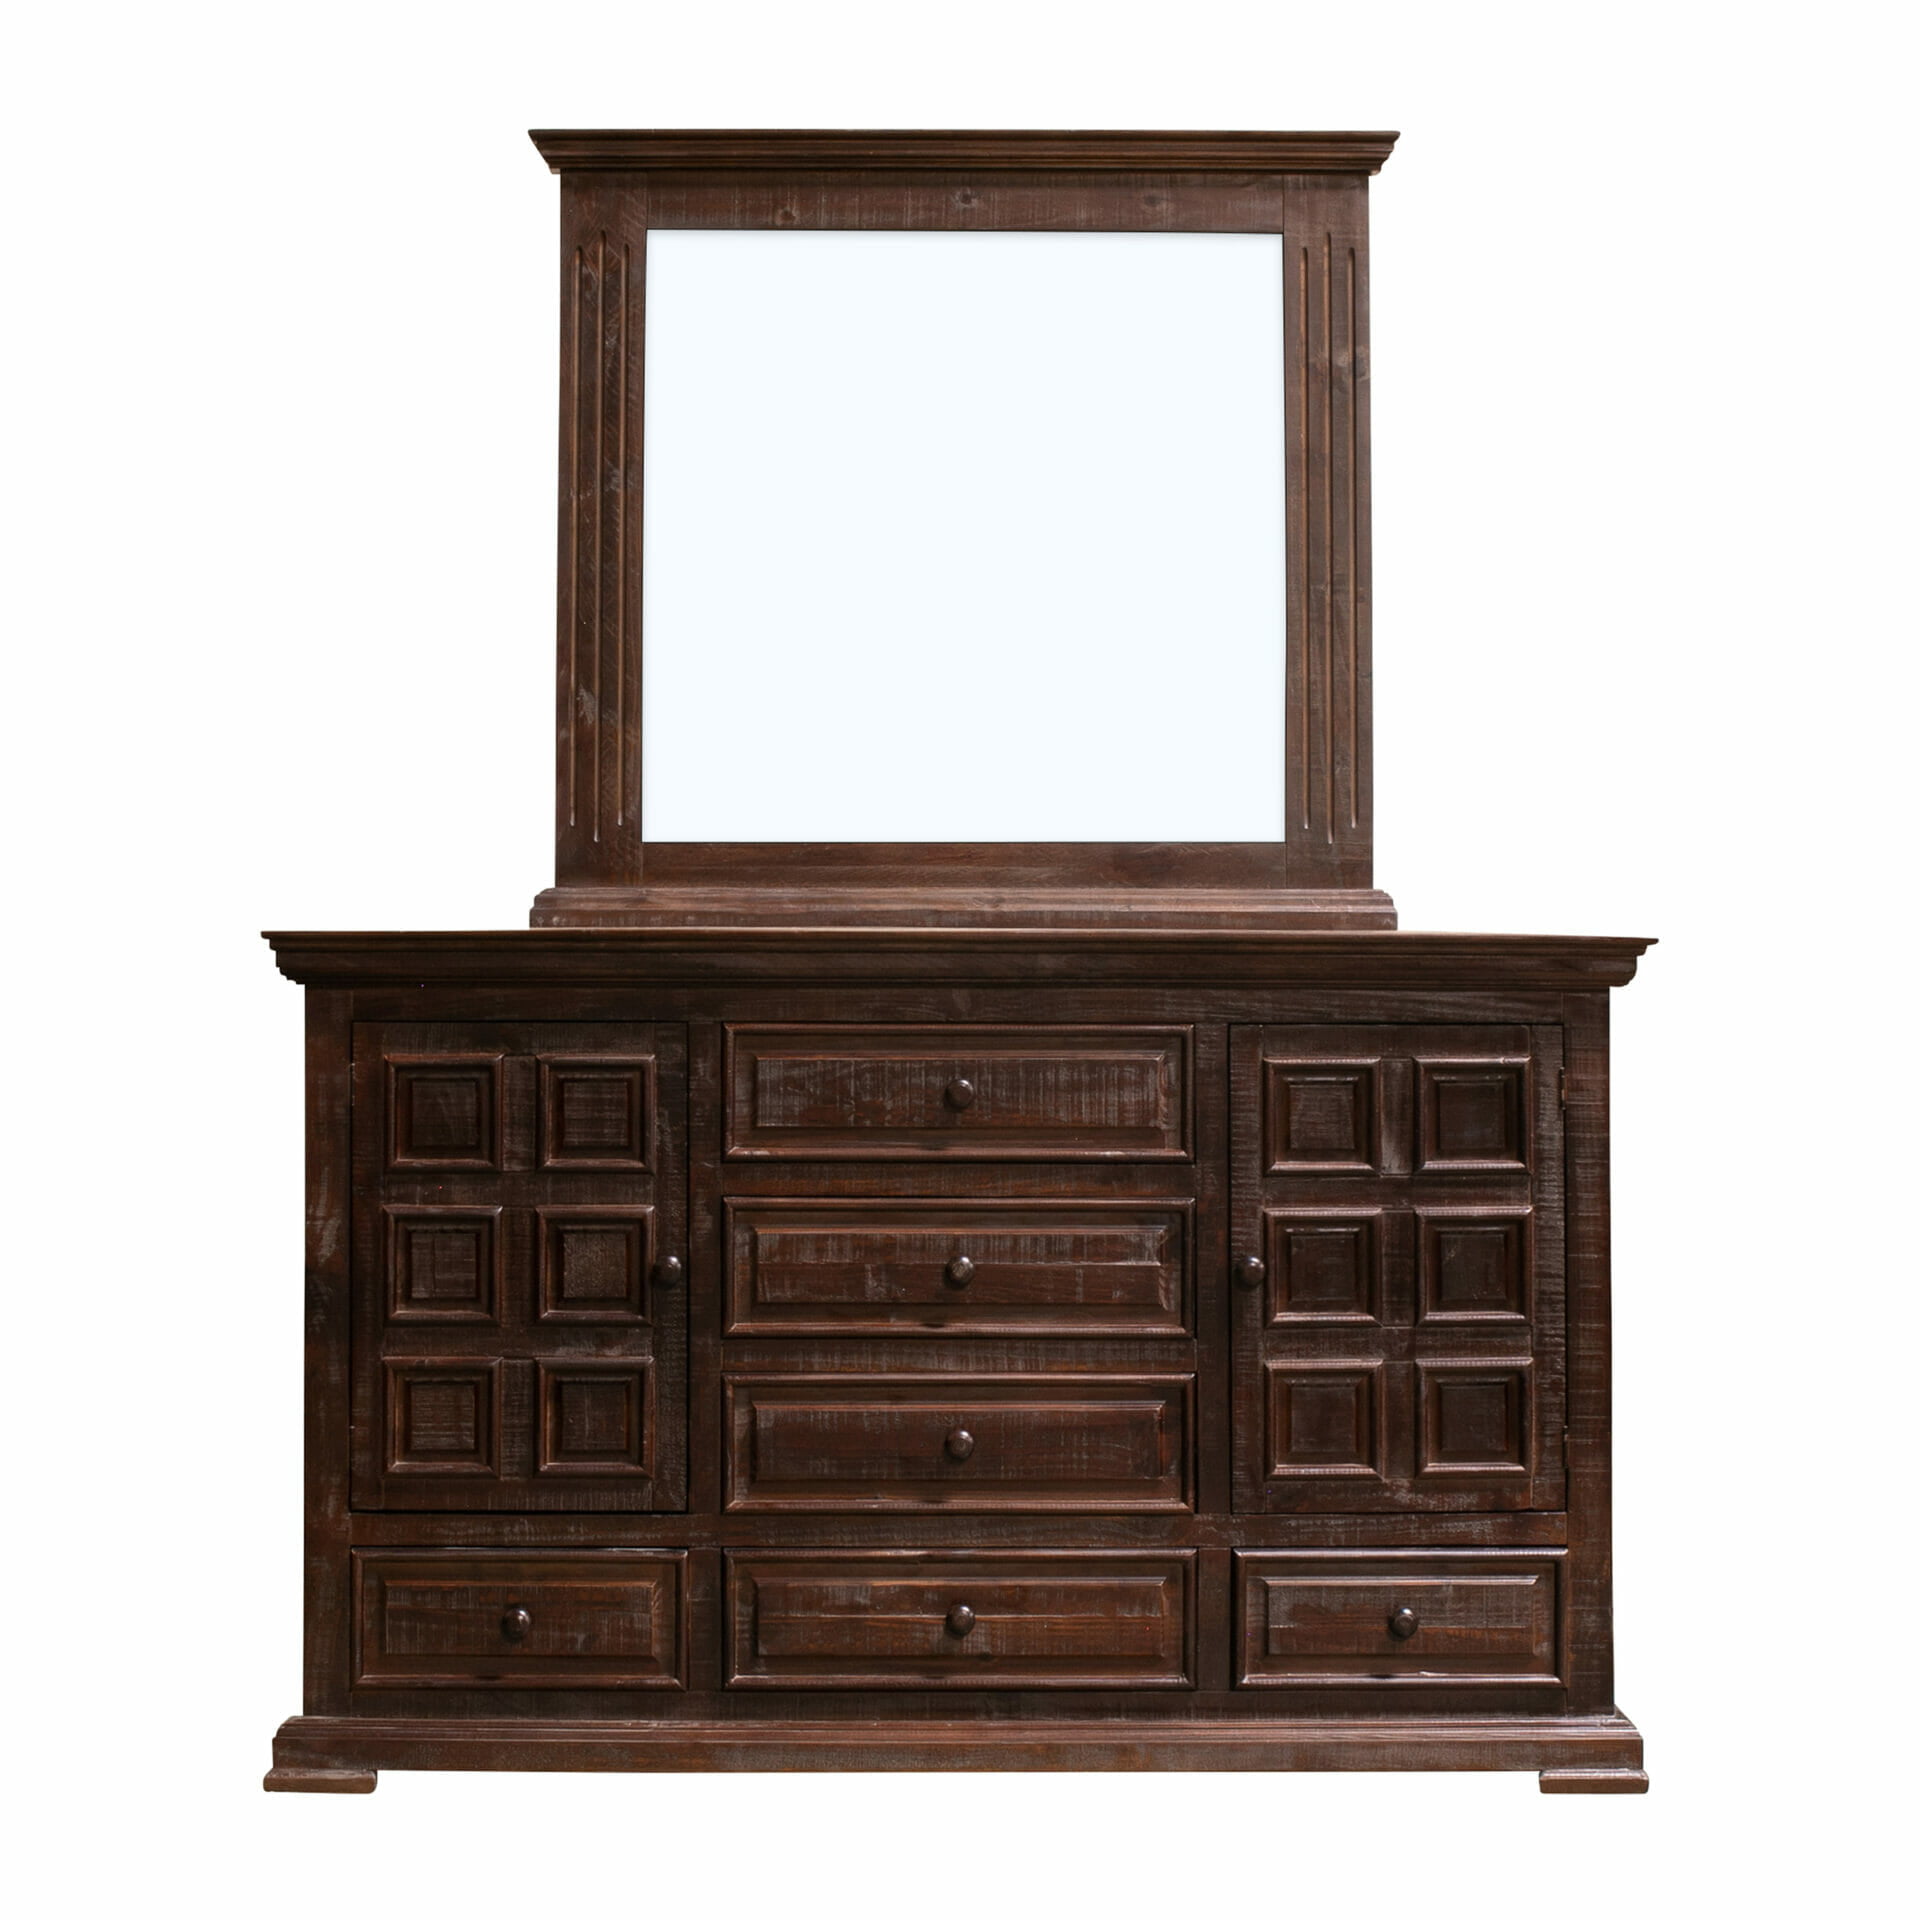 rustic dresser with mirror